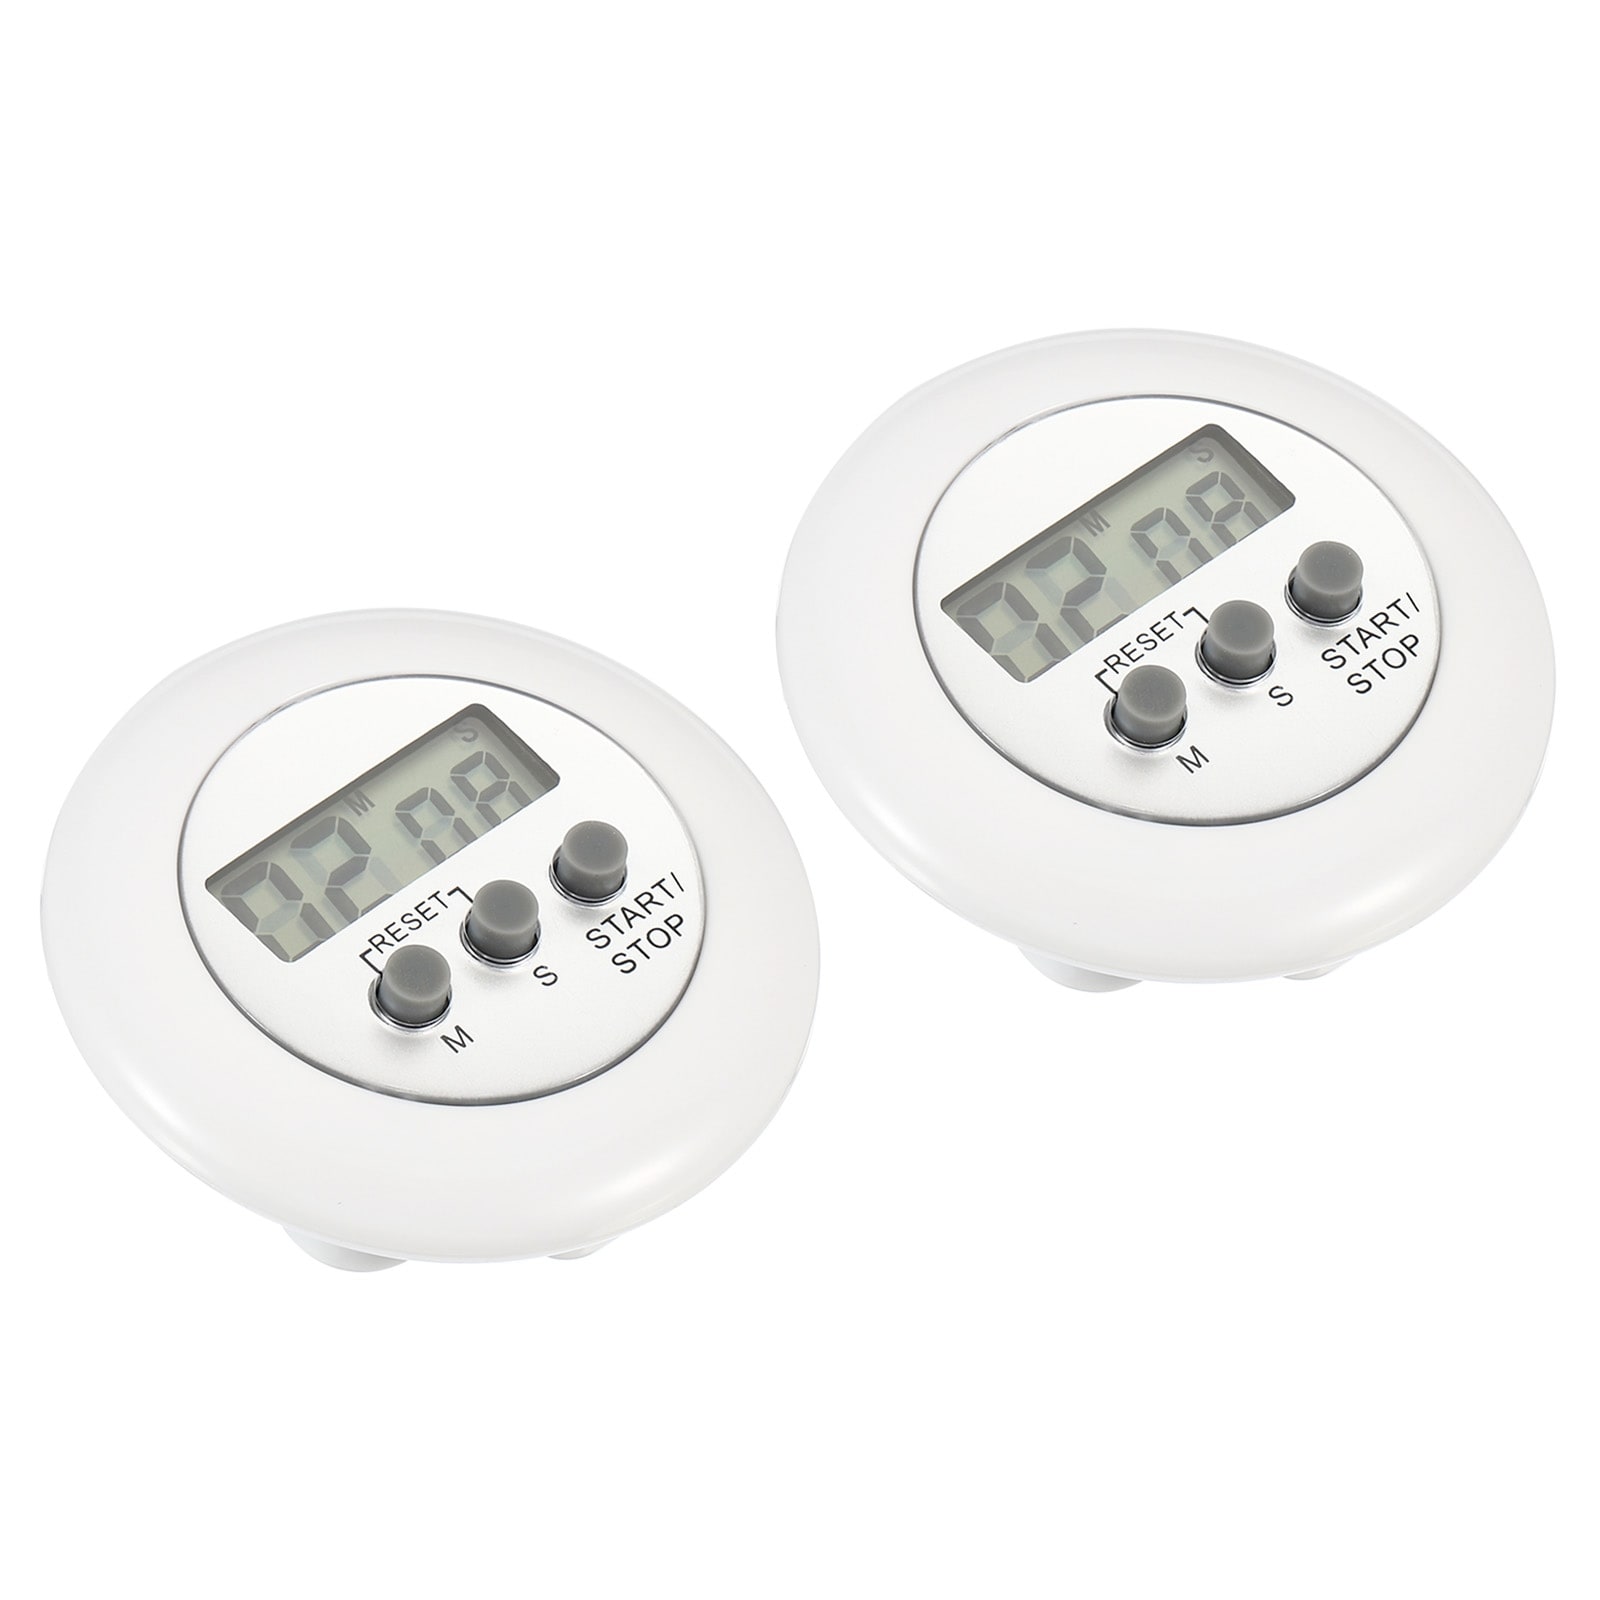 https://ak1.ostkcdn.com/images/products/is/images/direct/c38a964a05de0c4c093160aa7d8ceb28a8903c89/Round-Digital-Timer%2C2pcs-Count-Down-UP-Clock-with-Magnetic%2CBig-LCD-Display-White.jpg